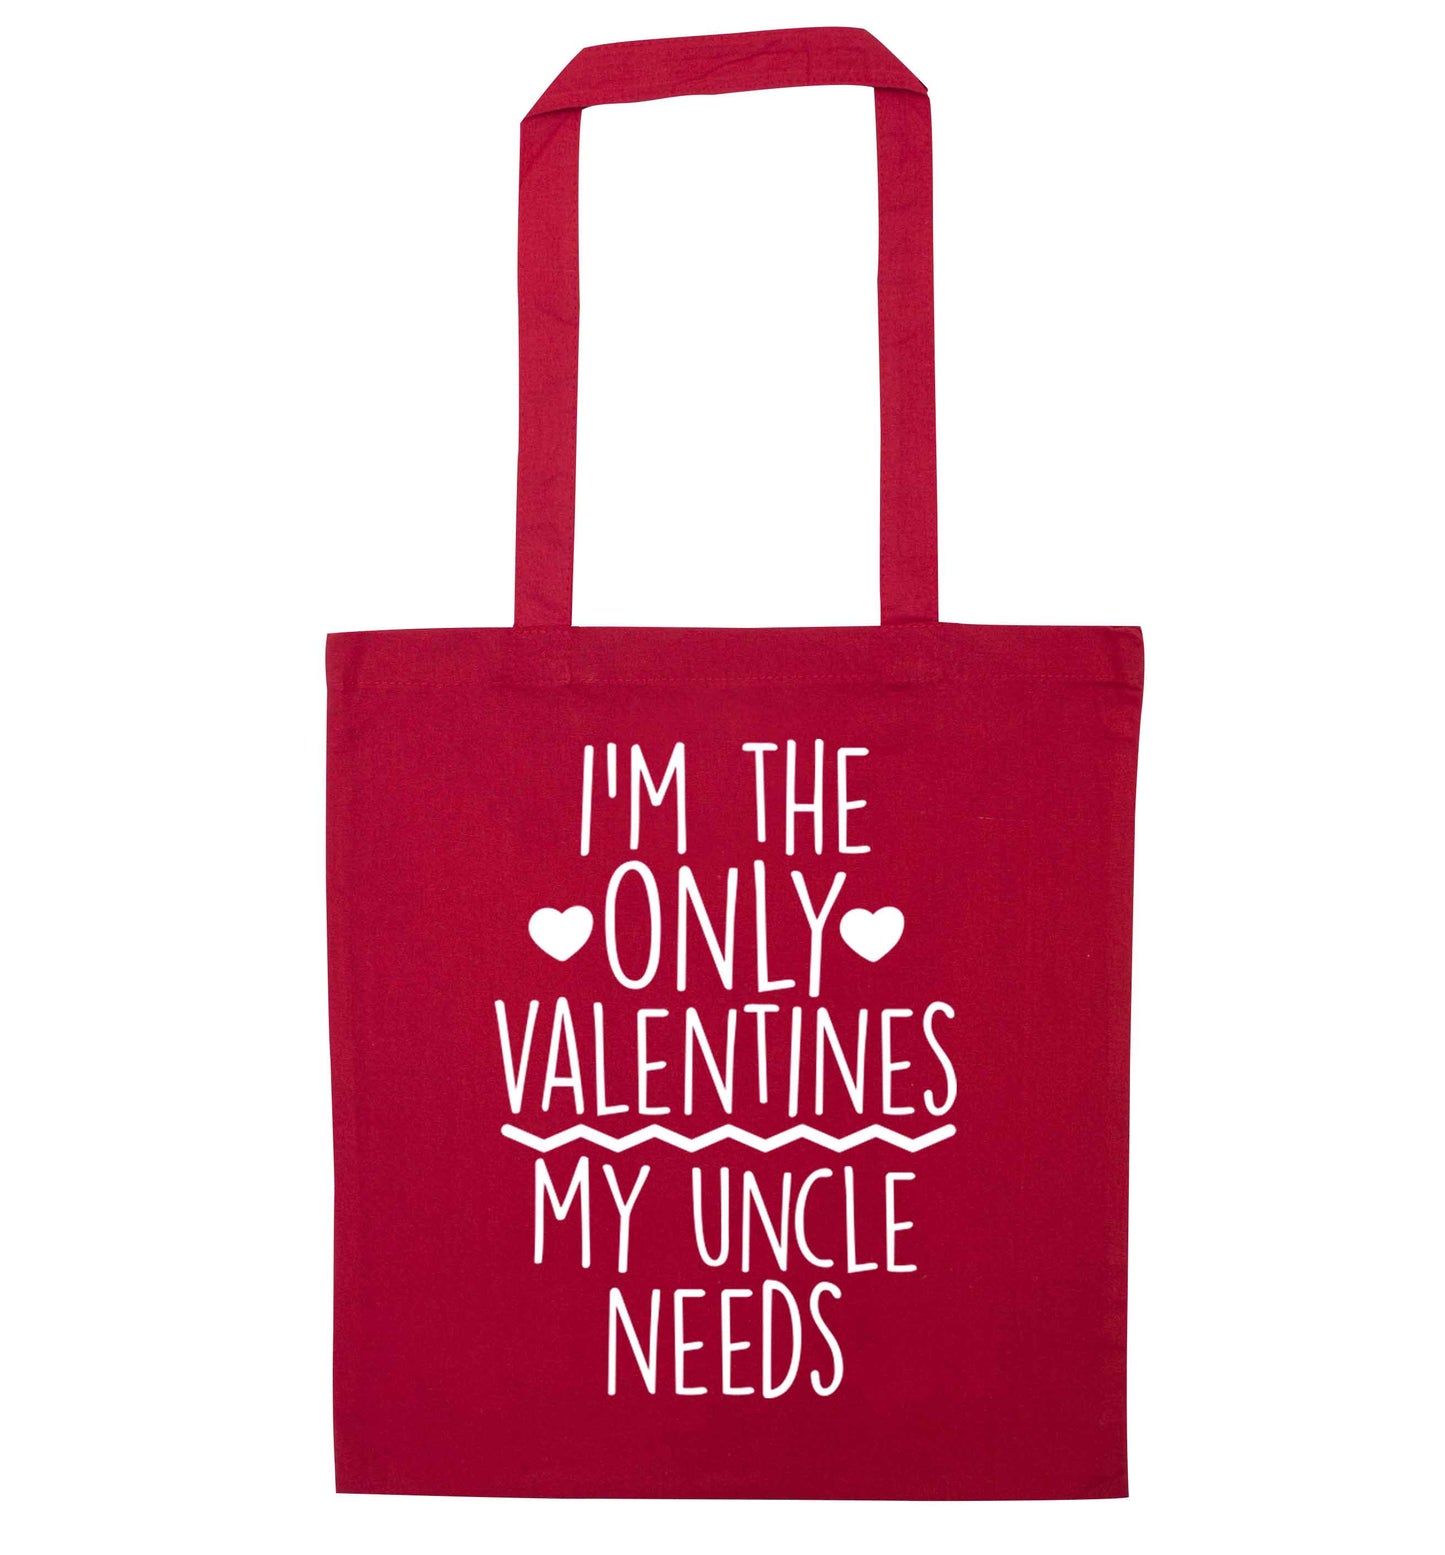 I'm the only valentines my uncle needs red tote bag